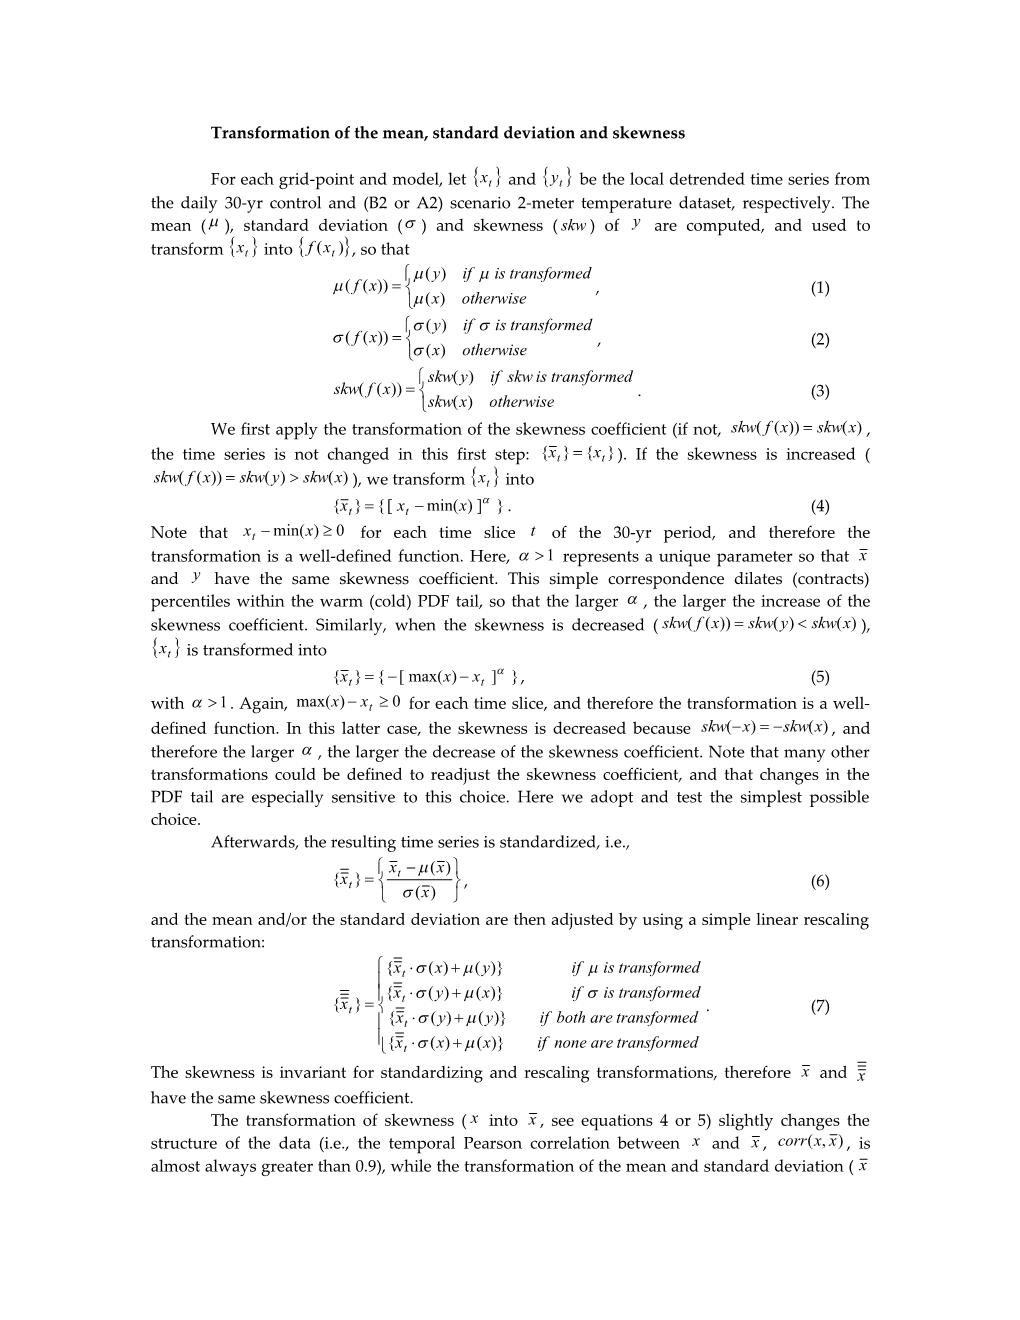 Transformation of the Mean, Standard Deviation and Skewness